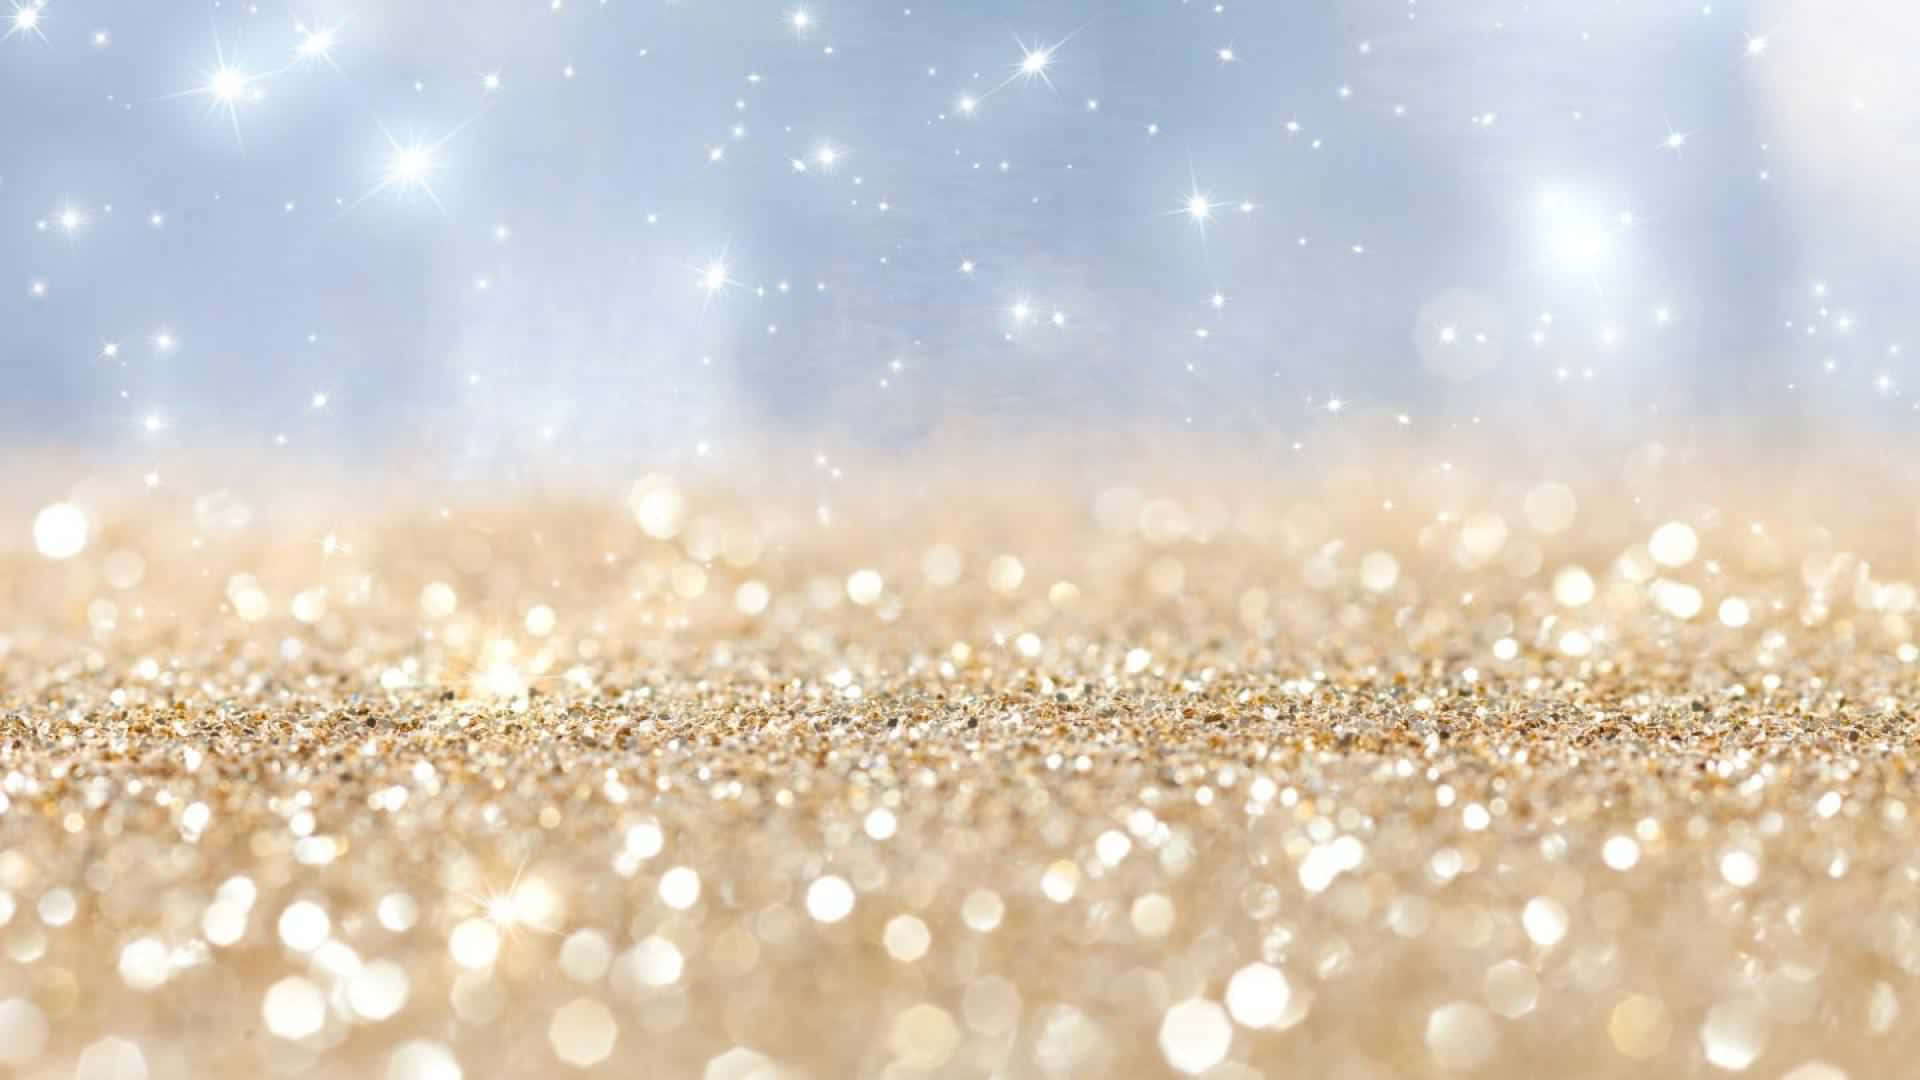 Download A Gold Glitter Background With Stars 